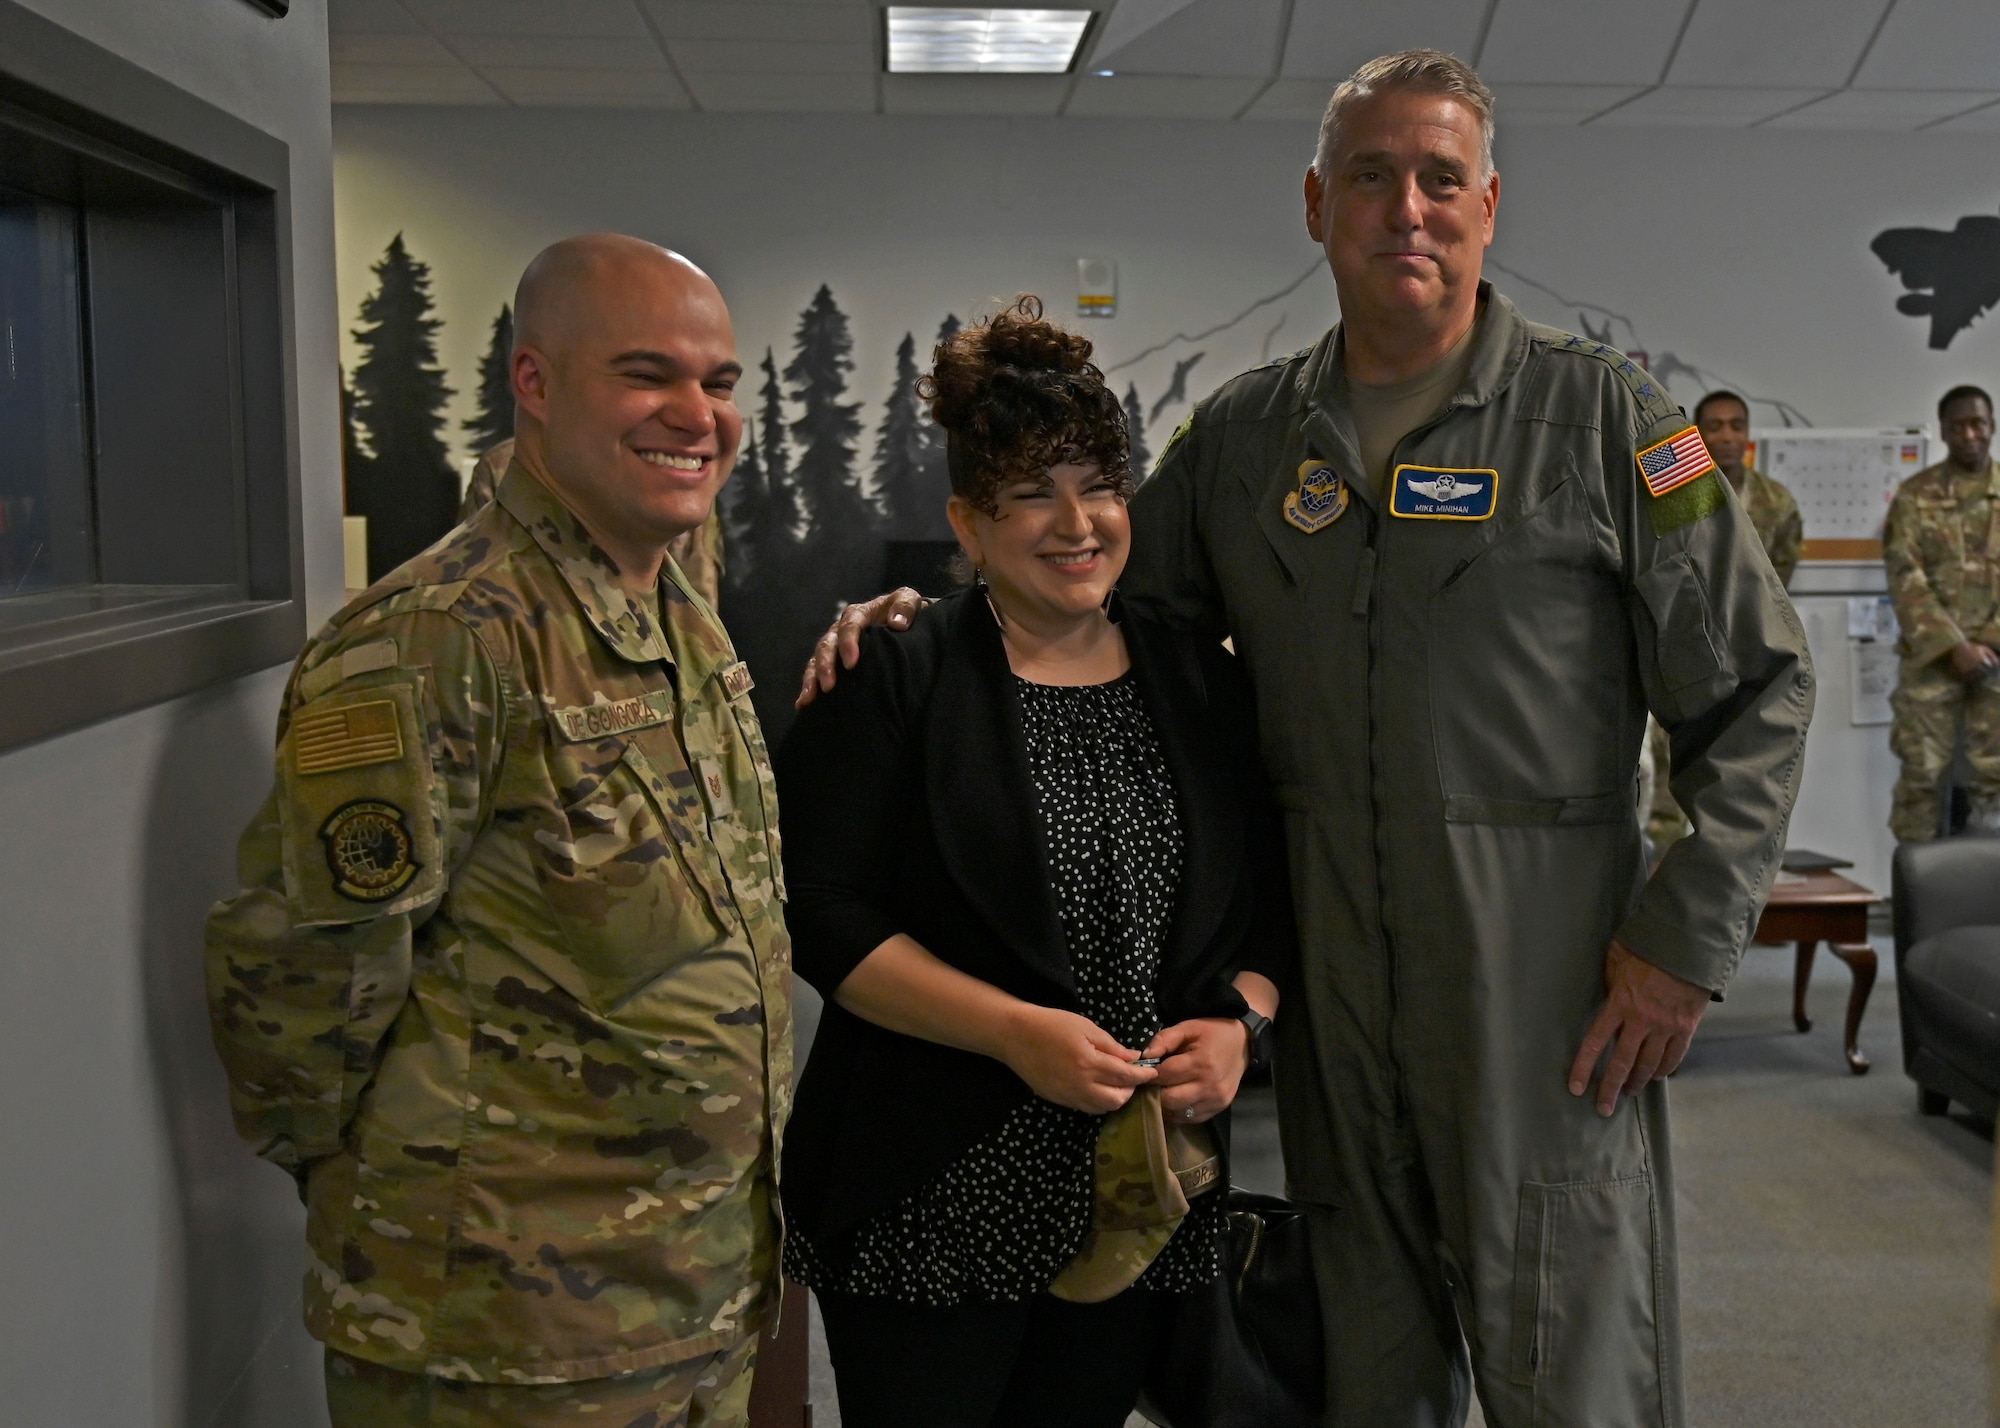 U.S. Air Force Gen. Mike Minihan, right, Air Mobility Command commander, poses for a photo with Tech. Sgt. Arturo De Gongora, left, airman dorm leader with the 627th Civil Engineer Squadron, and his wife at Joint Base Lewis-McChord, Washington, July 7, 2022. Minihan coined De Gongora as a star performer during his visit to JBLM. (U.S. Air Force photo by Senior Airman Callie Norton)